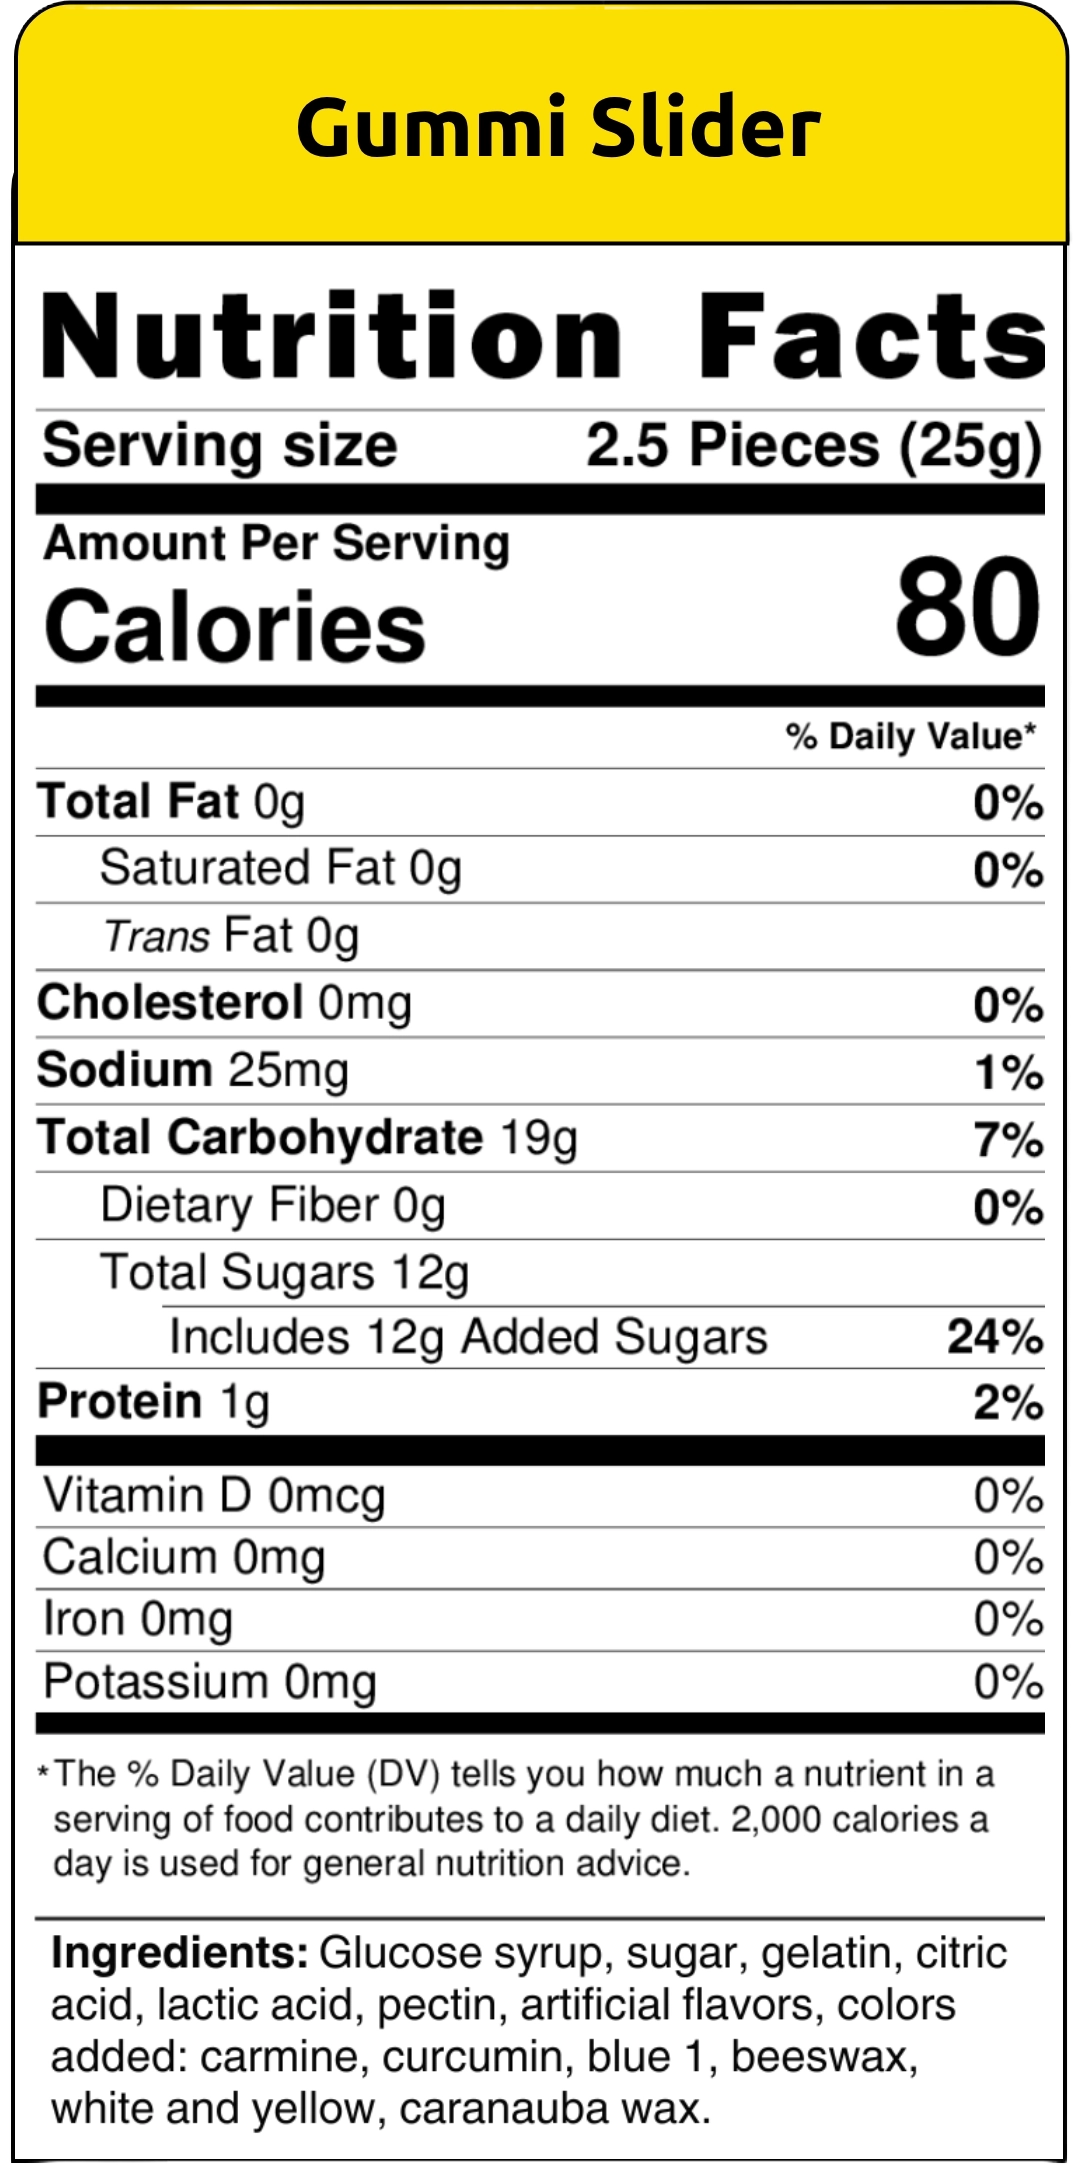 nutritional facts sour fruity fries 8ct